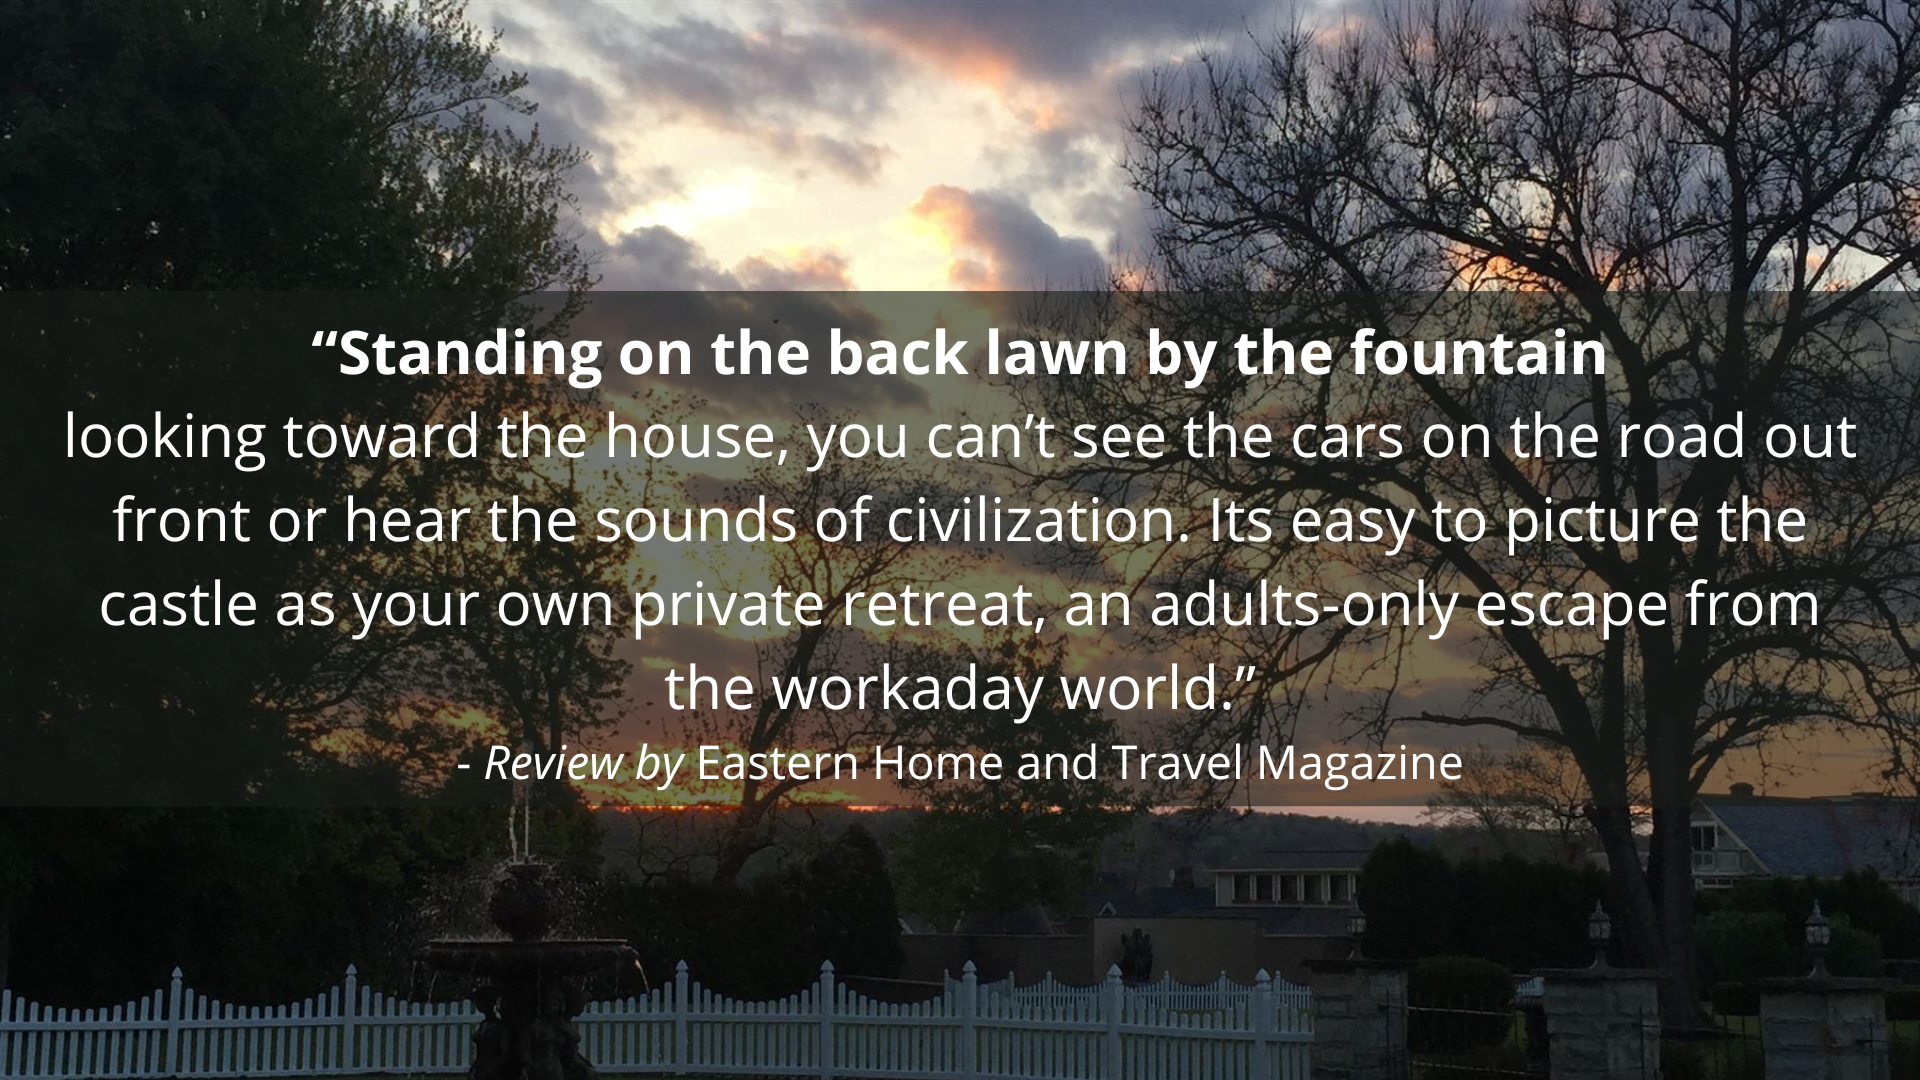 "Standing on the back lawn by the fountain looking towards the house, you can't see the cars on the road out front or hear the sounds of civilization. It's easy to picture the castle as your own private retreat, an adults-only escape from the workday world." - Review by Eastern Home & Travel Magazine